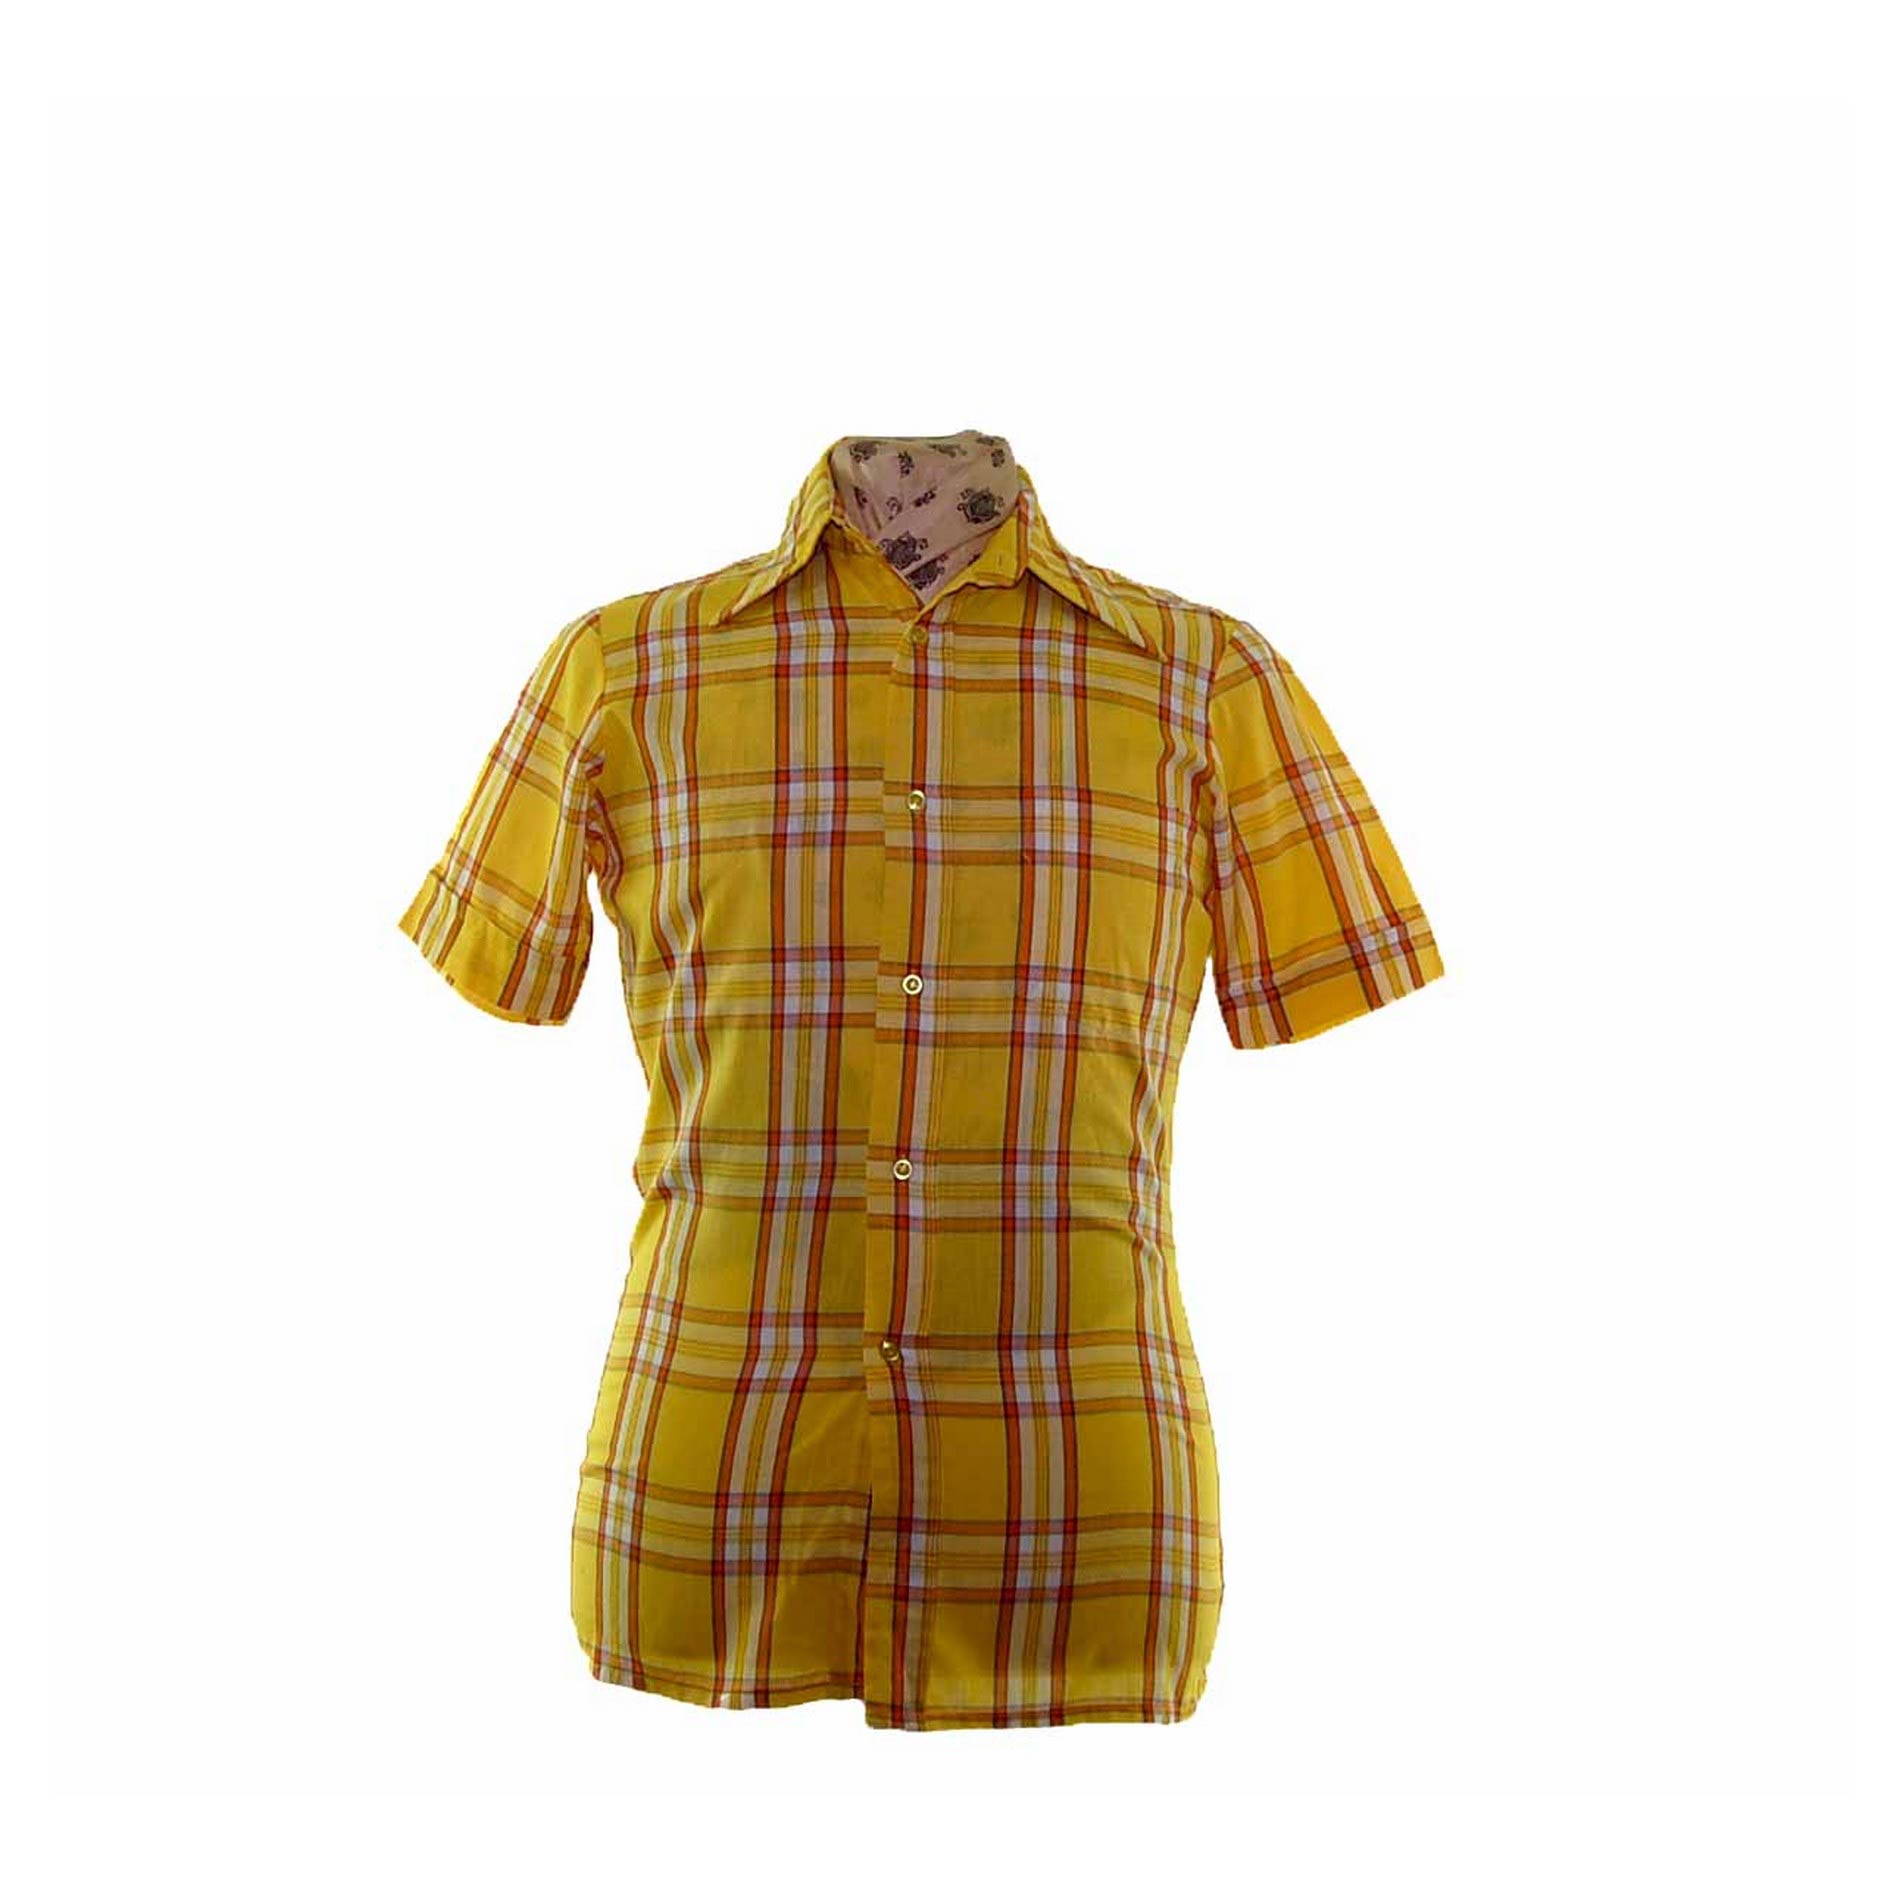 70s Yellow Checked Short Sleeve Shirt - Blue 17 Vintage Clothing